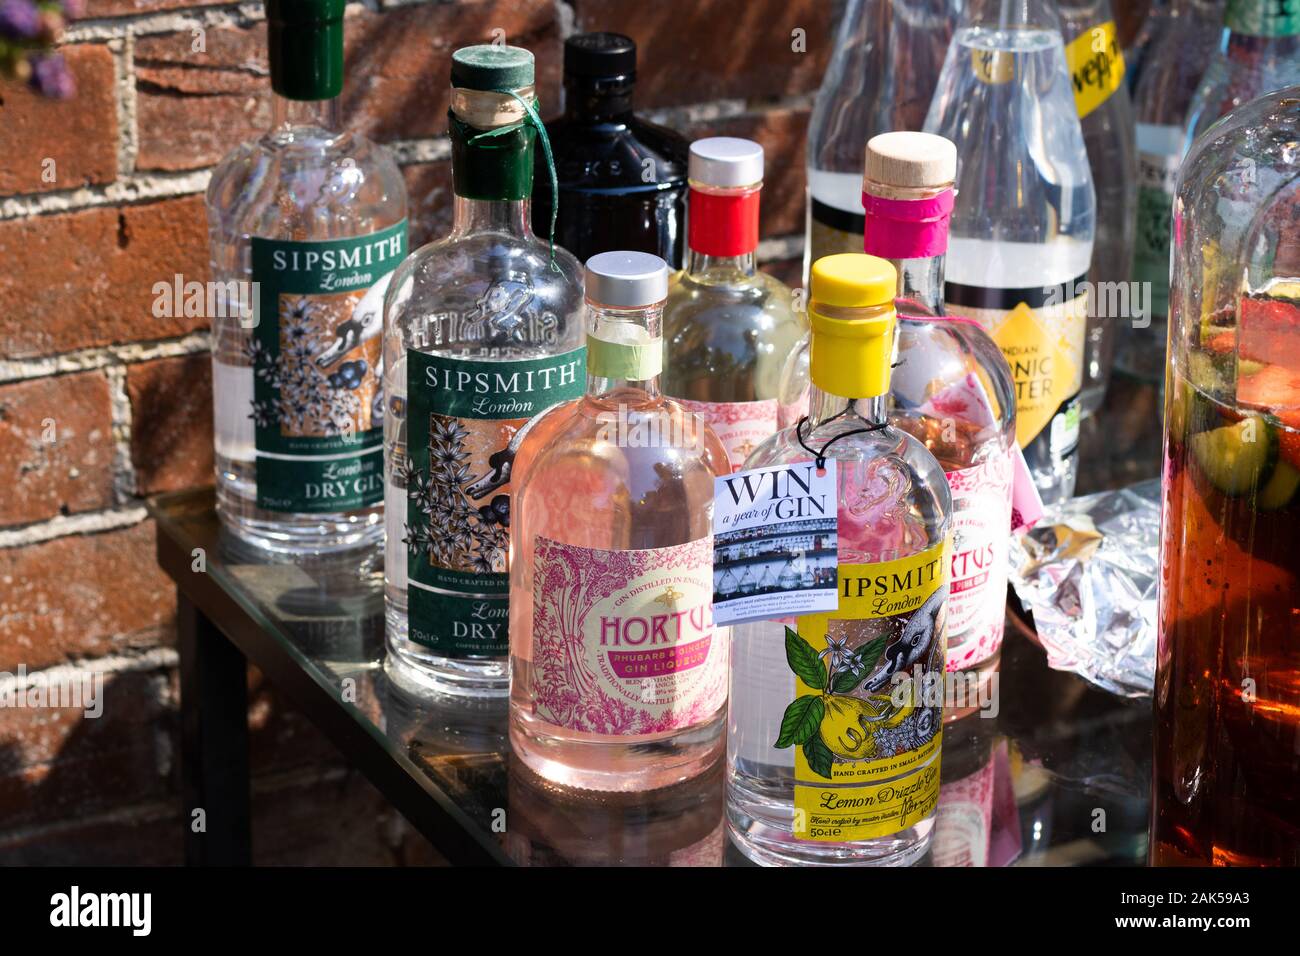 Bottles of alcohol on a table Stock Photo